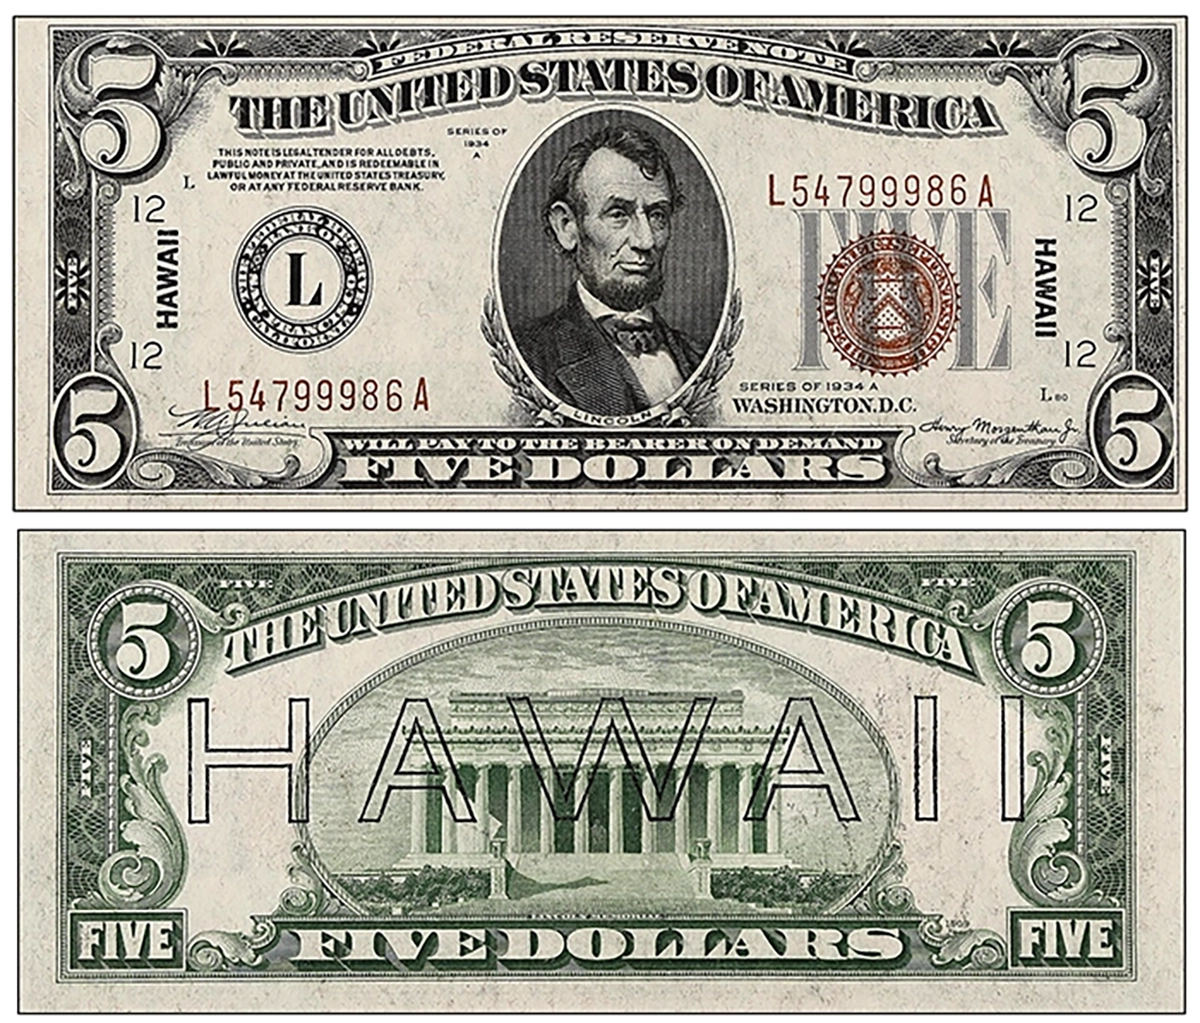 Series 1935A, Hawaii Issue, $5 Federal Reserve Note. Image: Stack's Bowers.